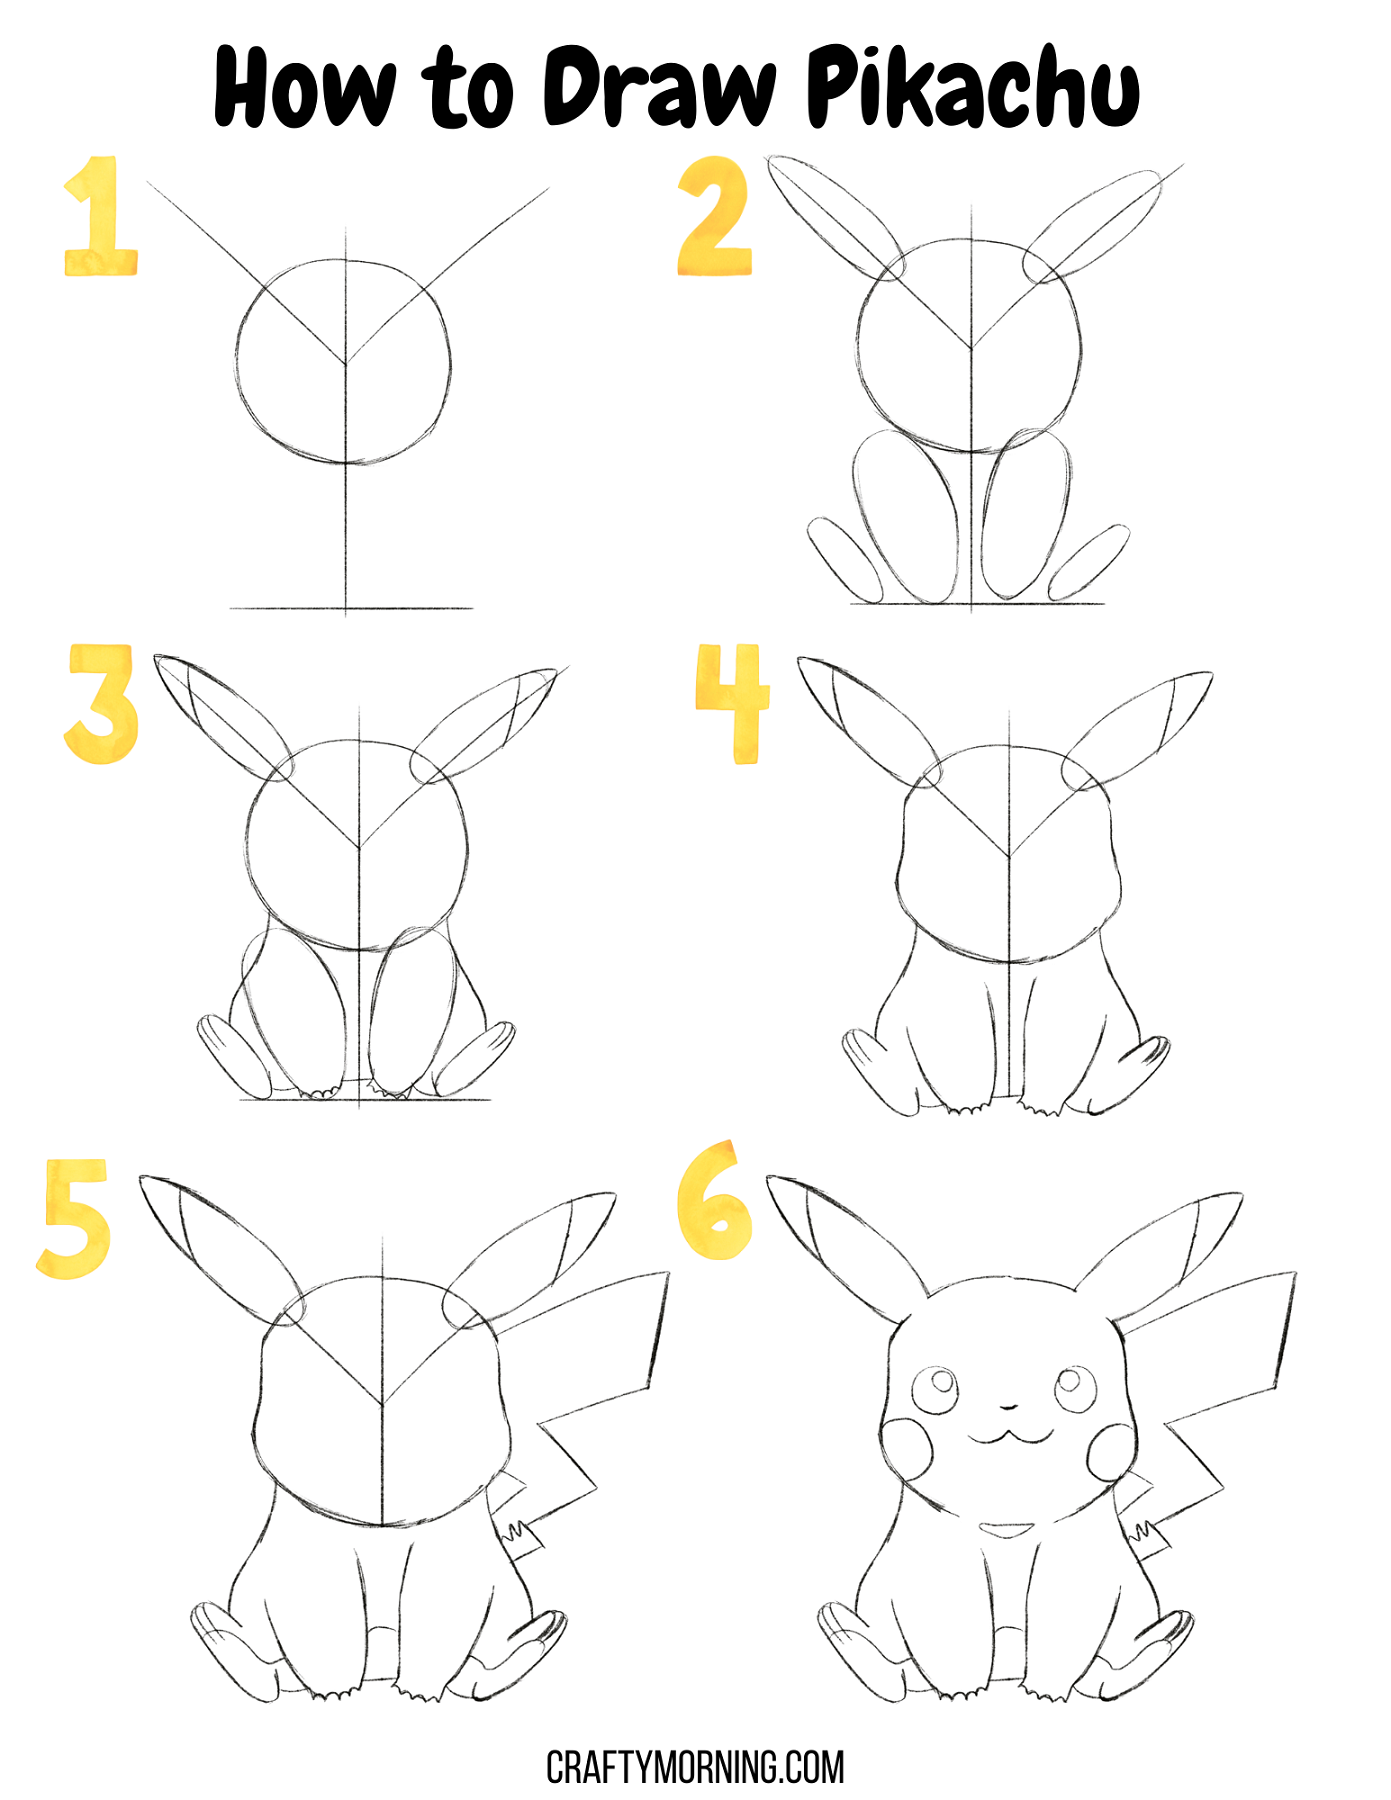 Pikachu Drawing Easy Step by Step For Kids/Beginners